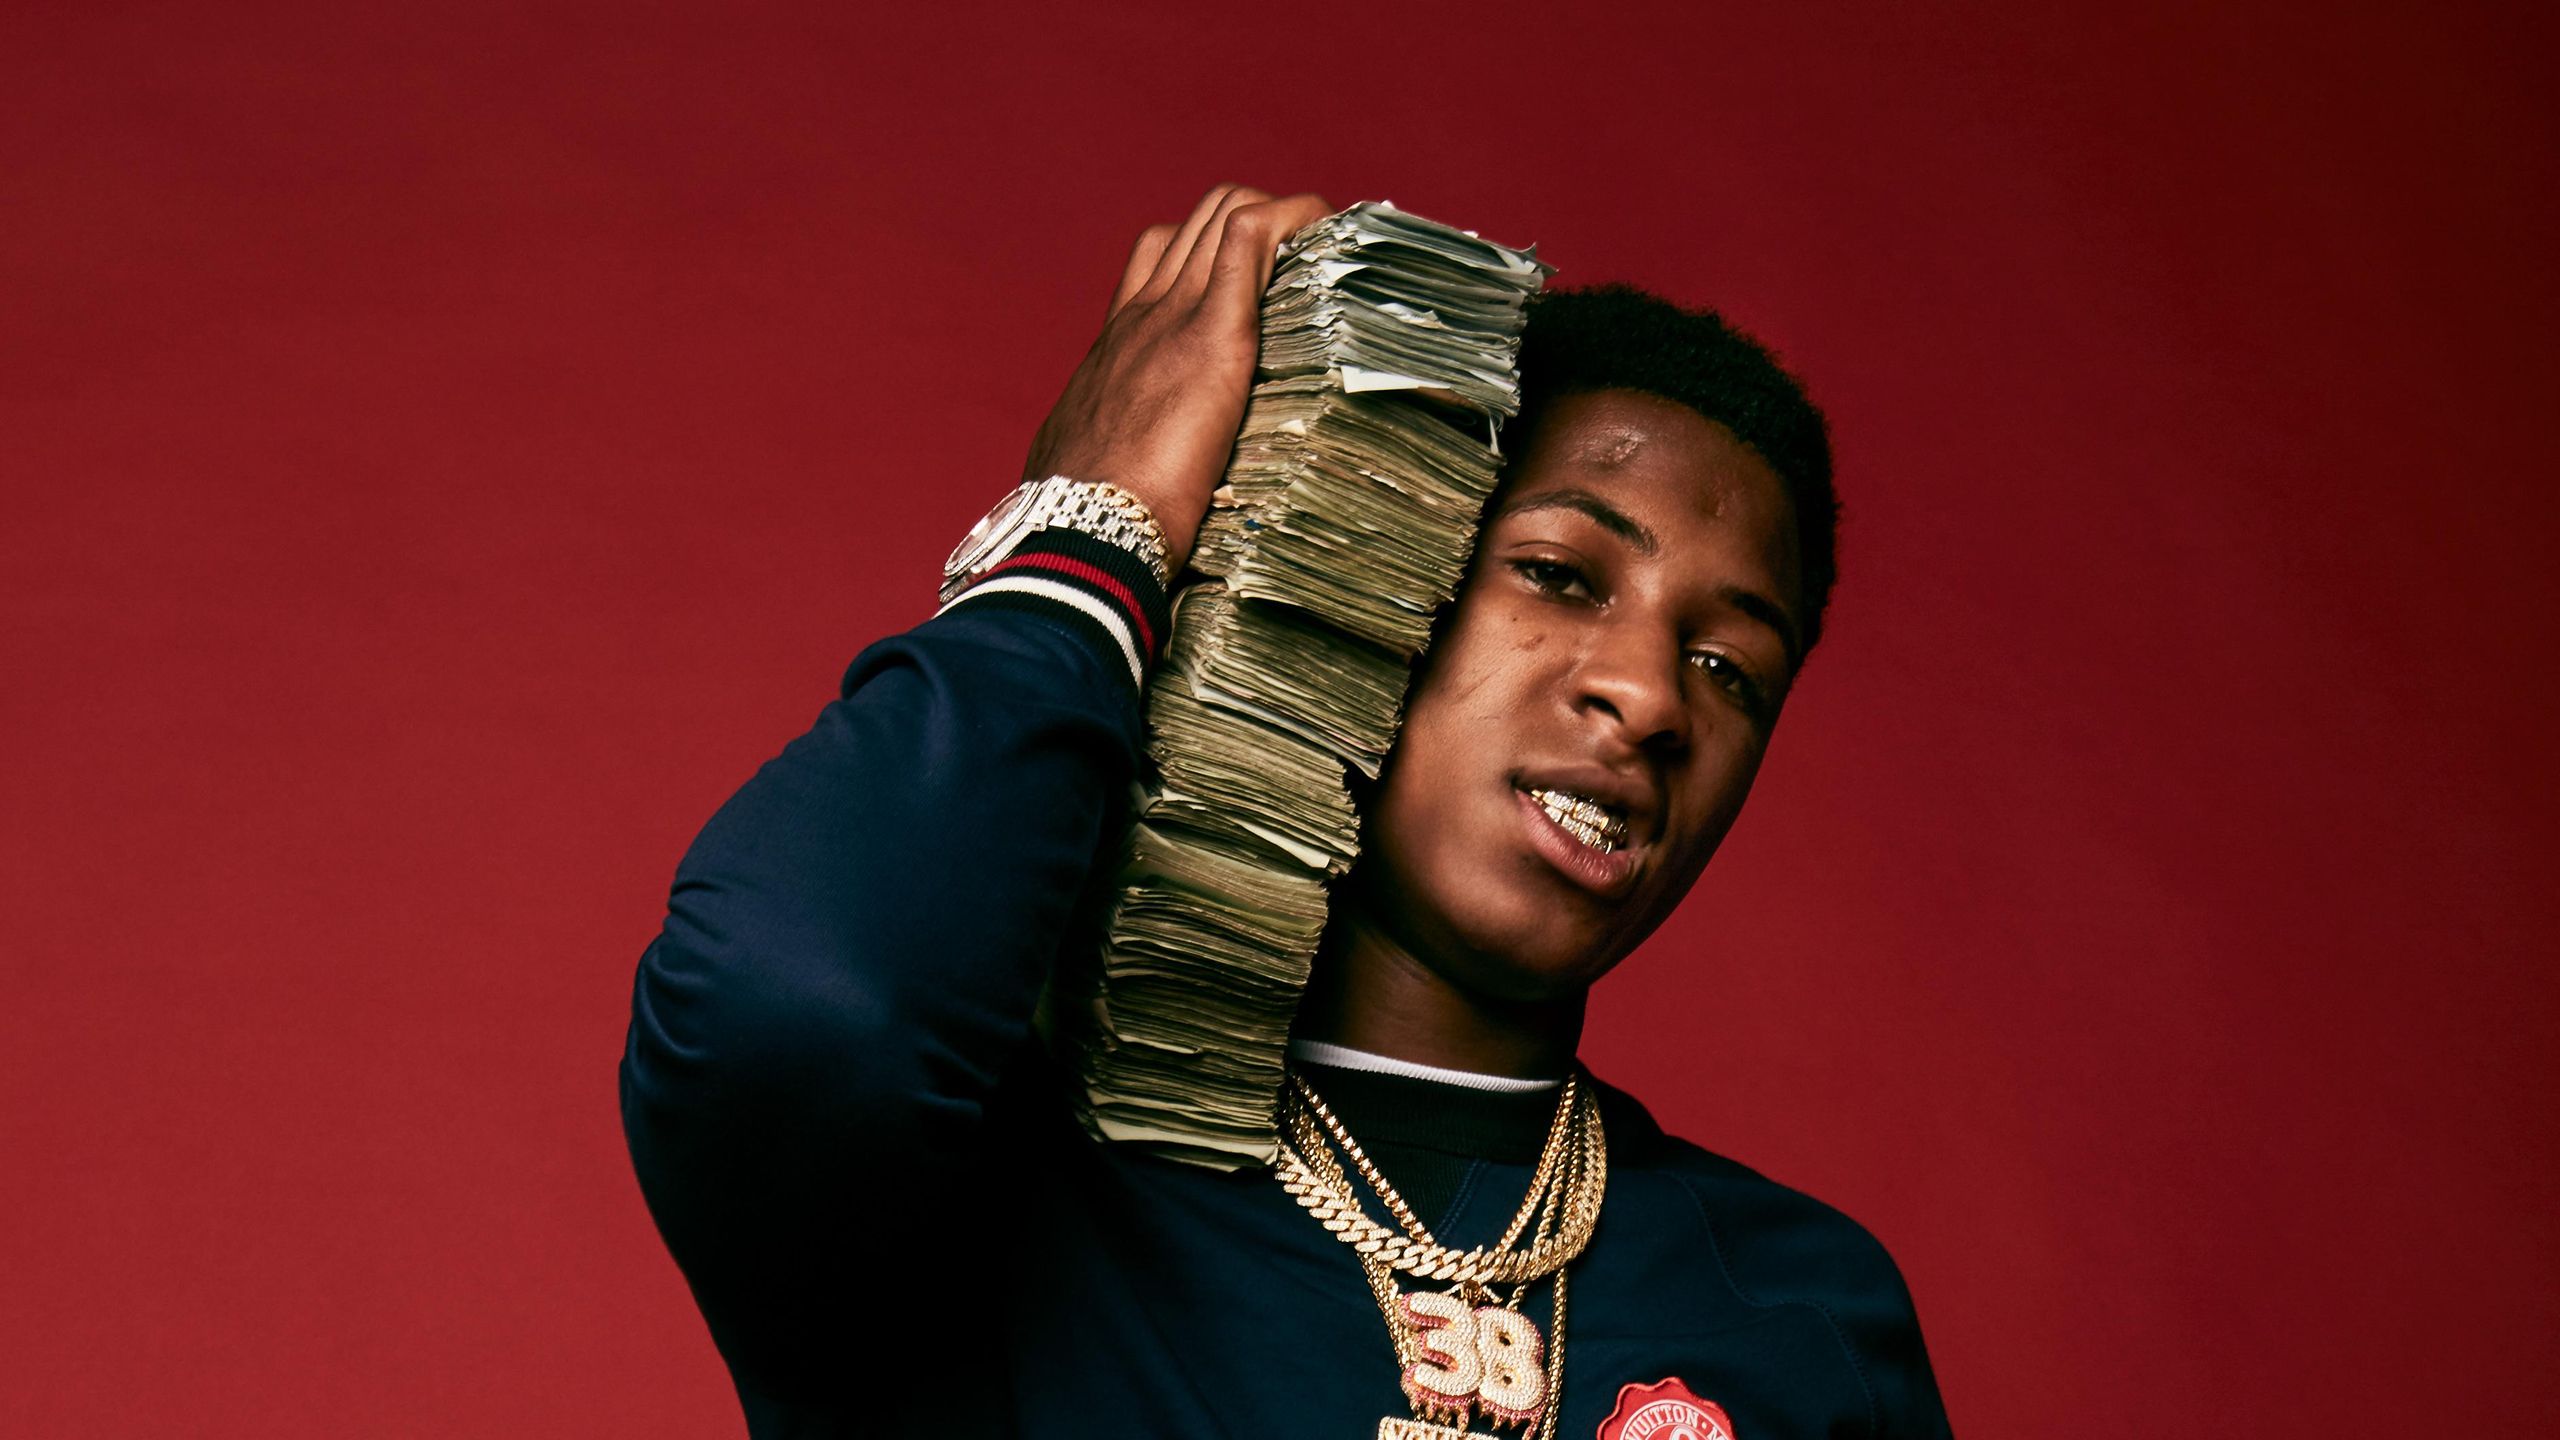 NBA Youngboy In Red Background With Money Bundle On Neck HD NBA Youngboy Wallpaper